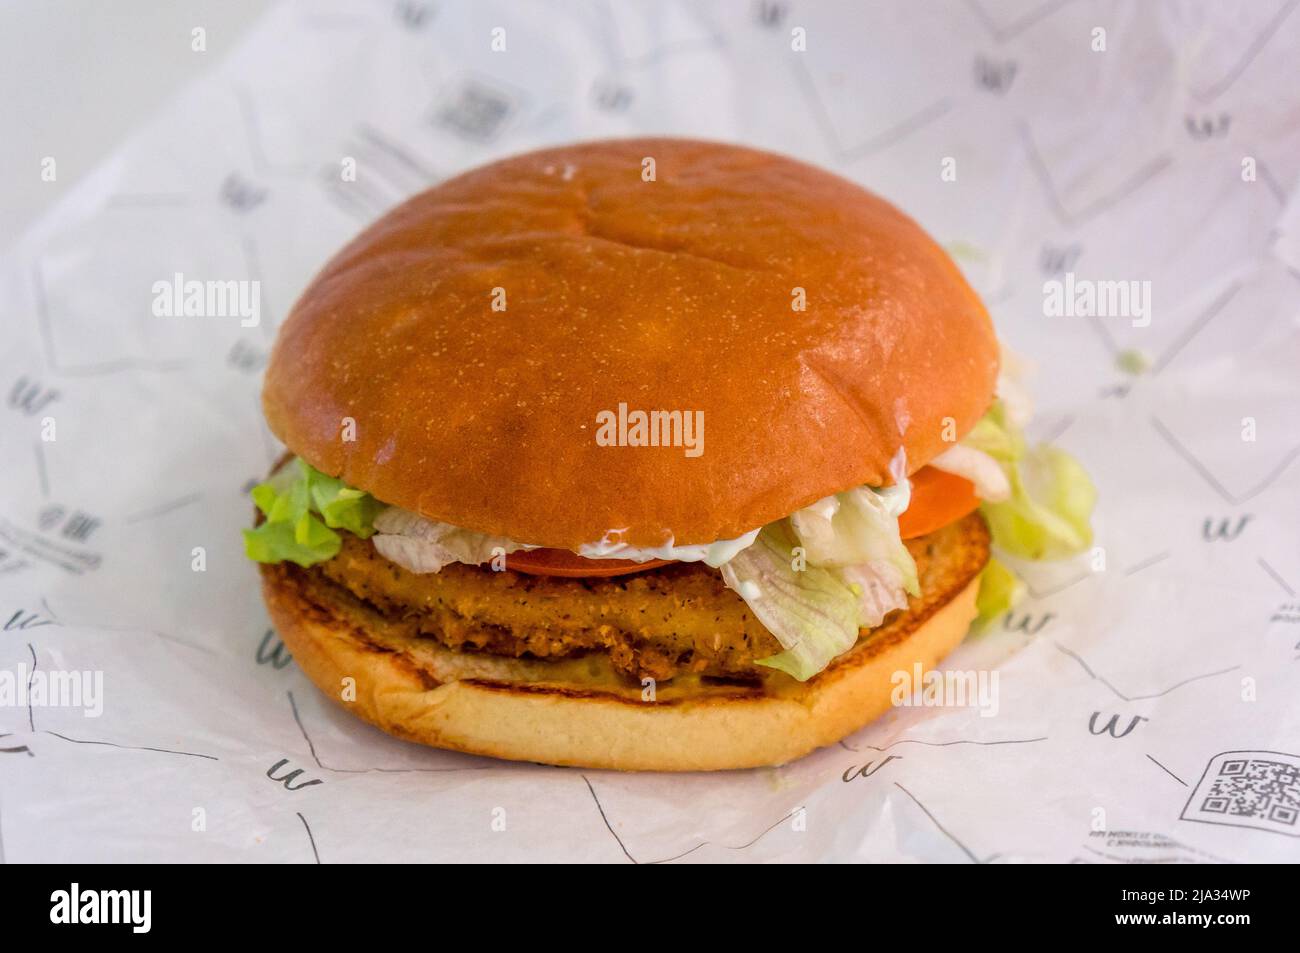 Moscow, Russia, March 13 2018: McDonald's Chicken gourmet burger, McDonald's is a fast food restaurant chain founded in 1940. Stock Photo